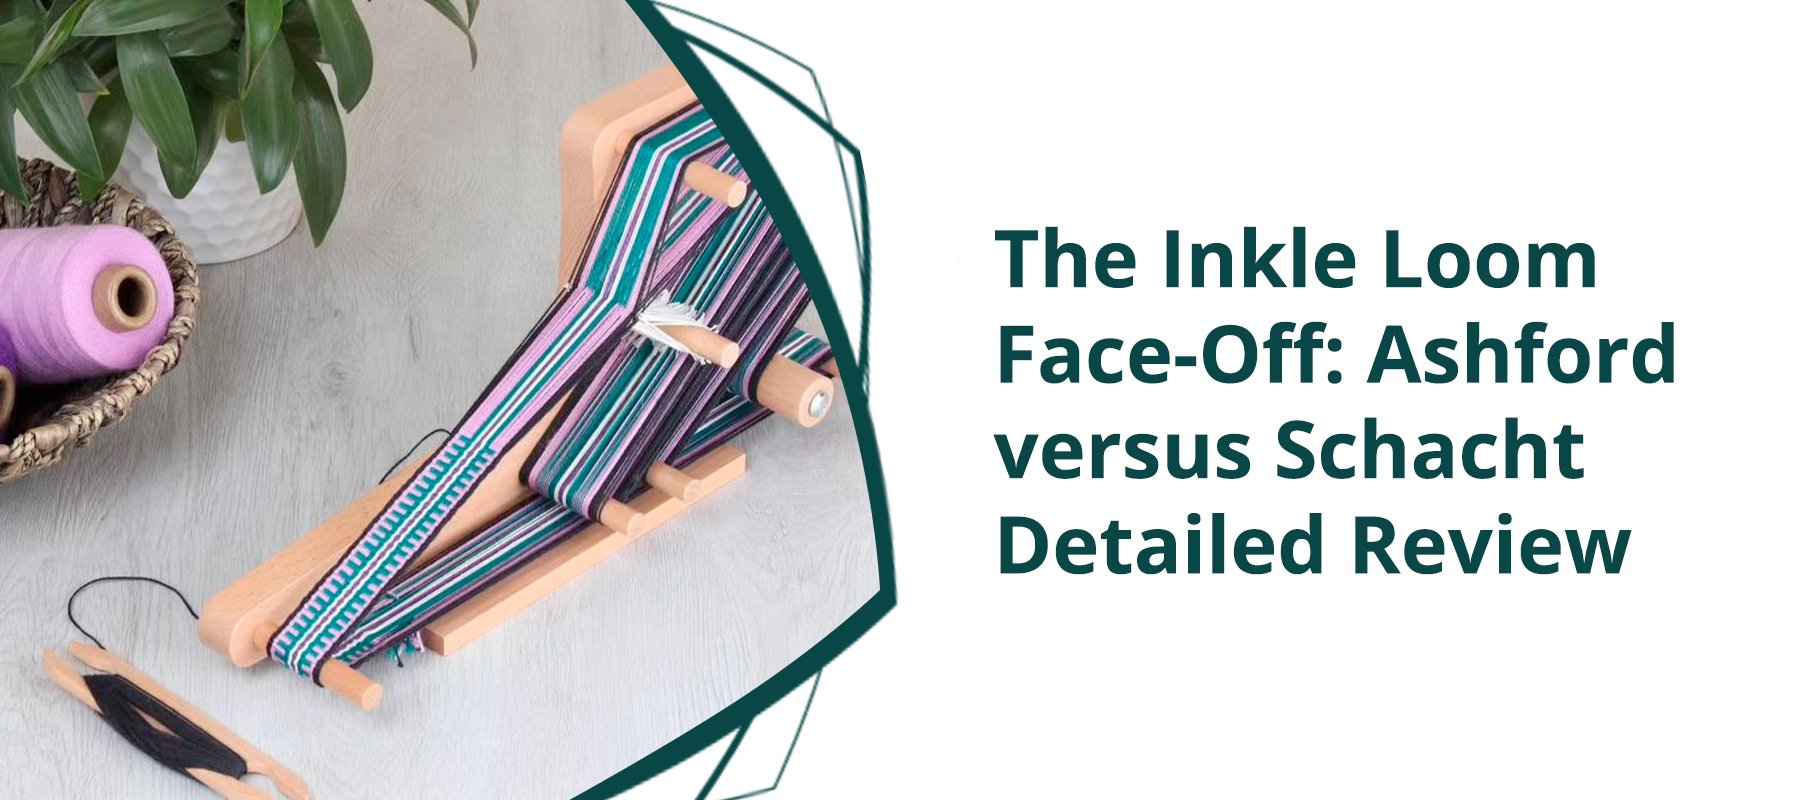 The Inkle Loom Face-Off: Ashford vs Schacht Detailed Review